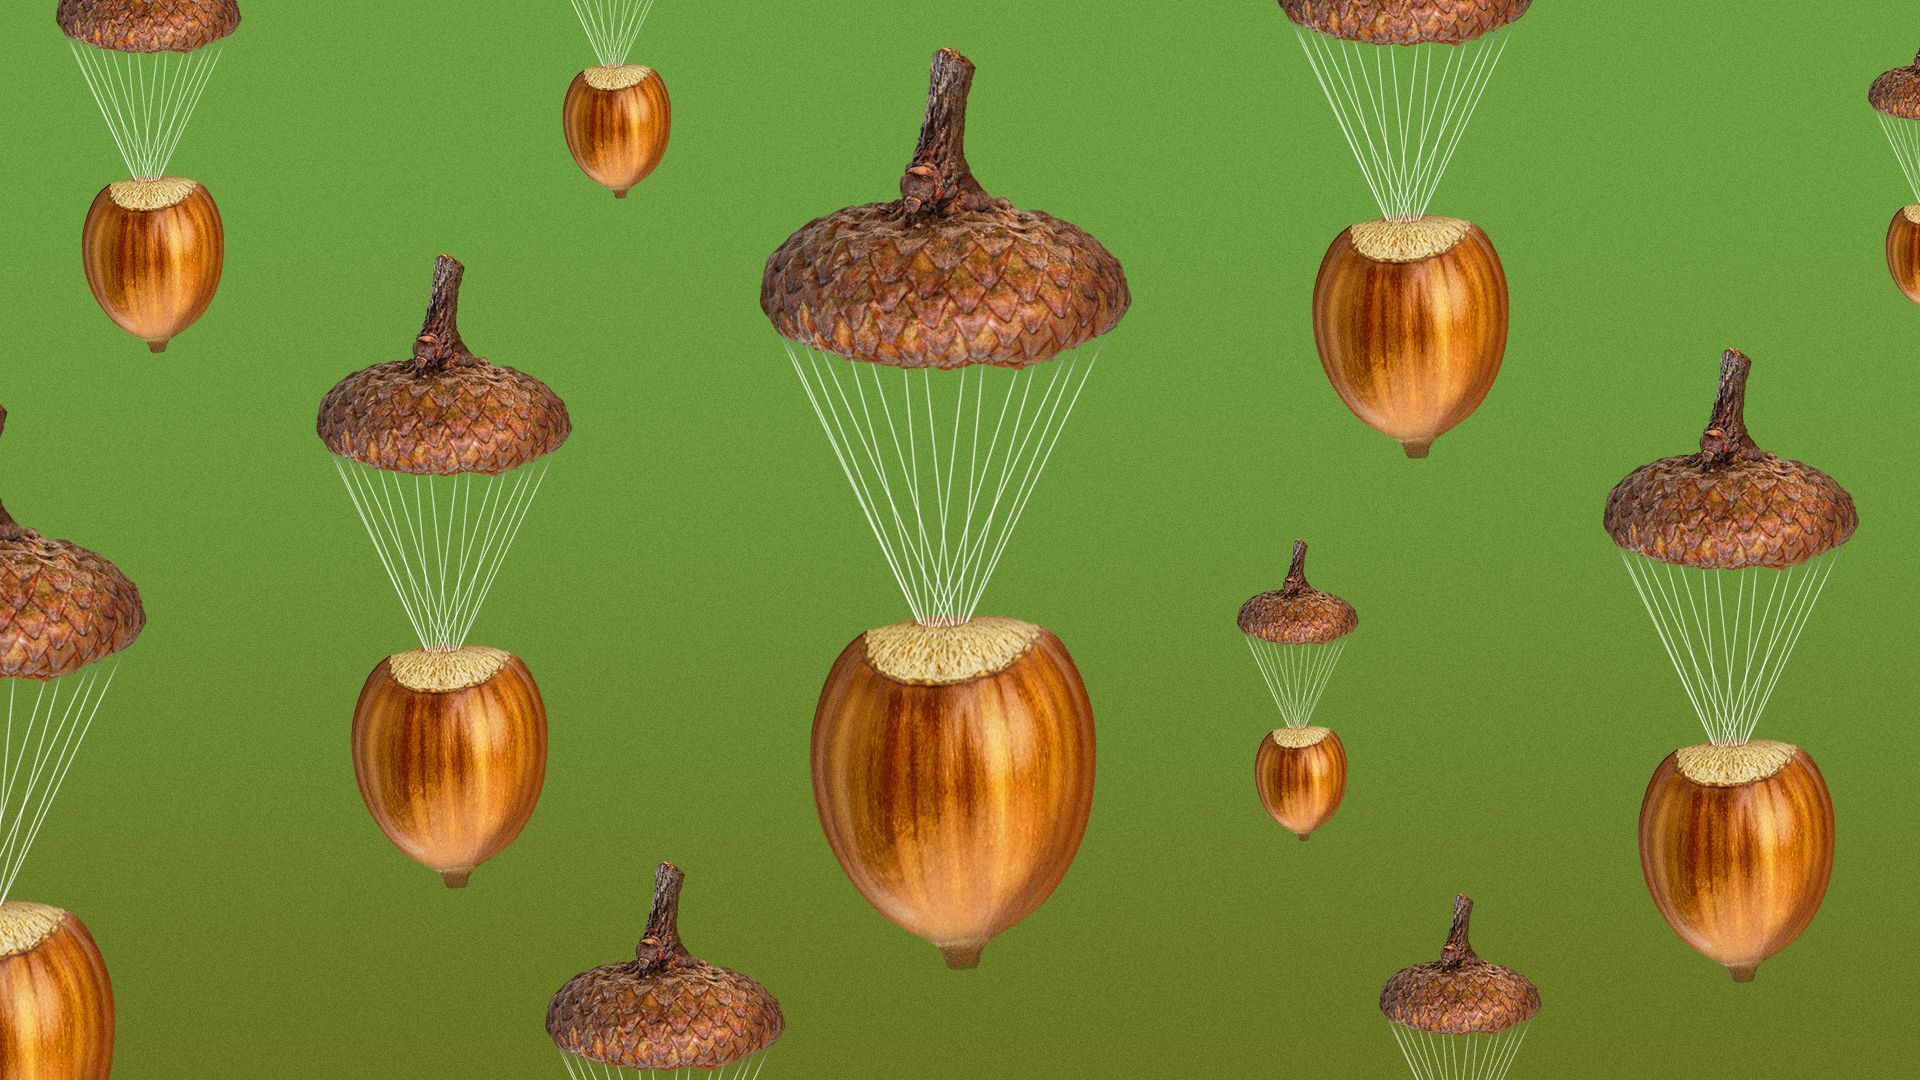 Illustration of acorns with parachutes made of acorn caps.